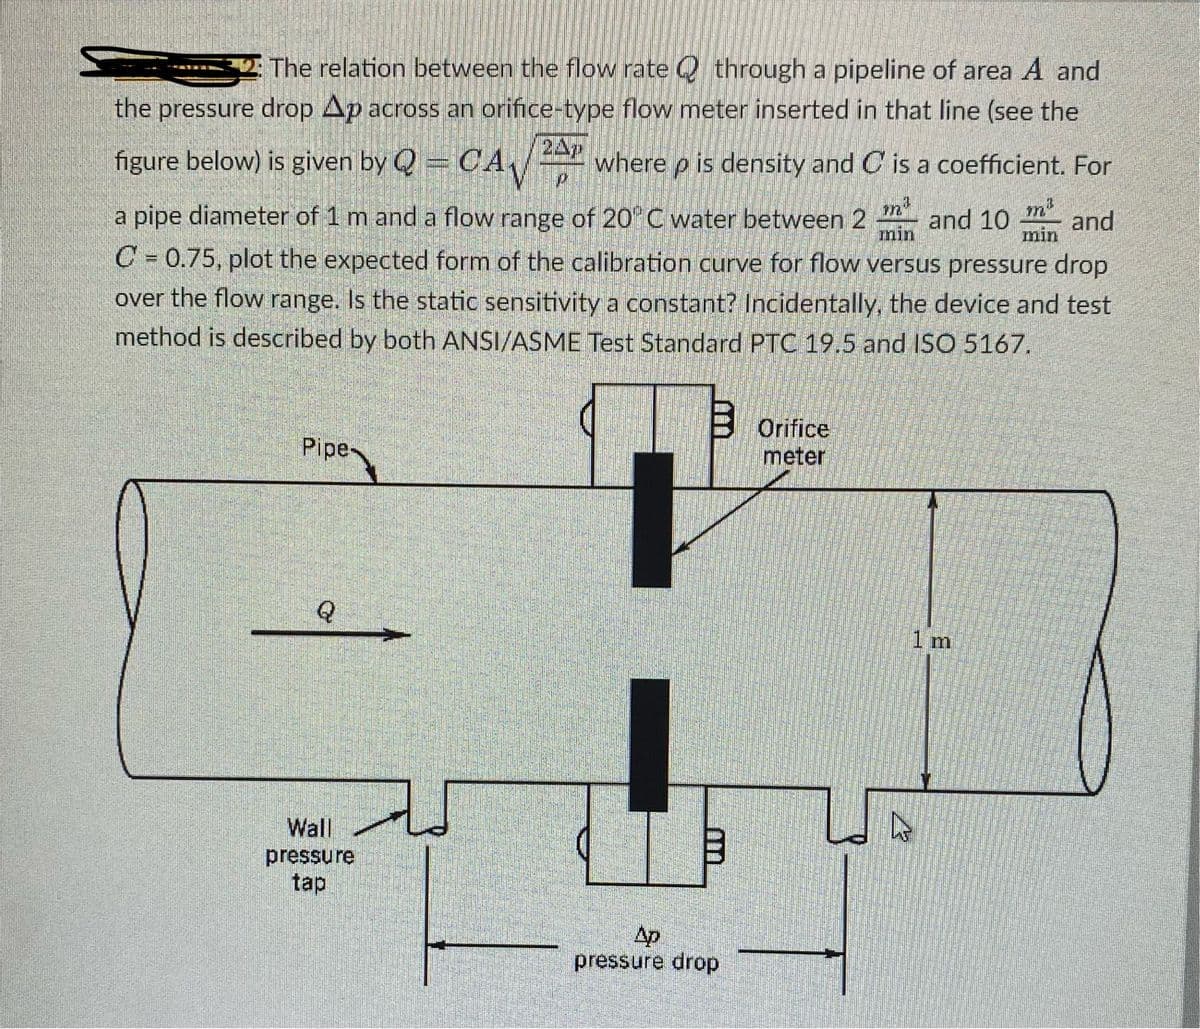 The relation between the flow rate through a pipeline of area A and
the pressure drop Ap across an orifice-type flow meter inserted in that line (see the
figure below) is given by Q = CA where p is density and C is a coefficient. For
P
min
a pipe diameter of 1 m and a flow range of 20°C water between 2 and 10 and
C= 0.75, plot the expected form of the calibration curve for flow versus pressure drop
over the flow range. Is the static sensitivity a constant? Incidentally, the device and test
method is described by both ANSI/ASME Test Standard PTC 19.5 and ISO 5167.
Pipe
Q
Wall
pressure
tap
Ap
pressure drop
Orifice
meter
13
min